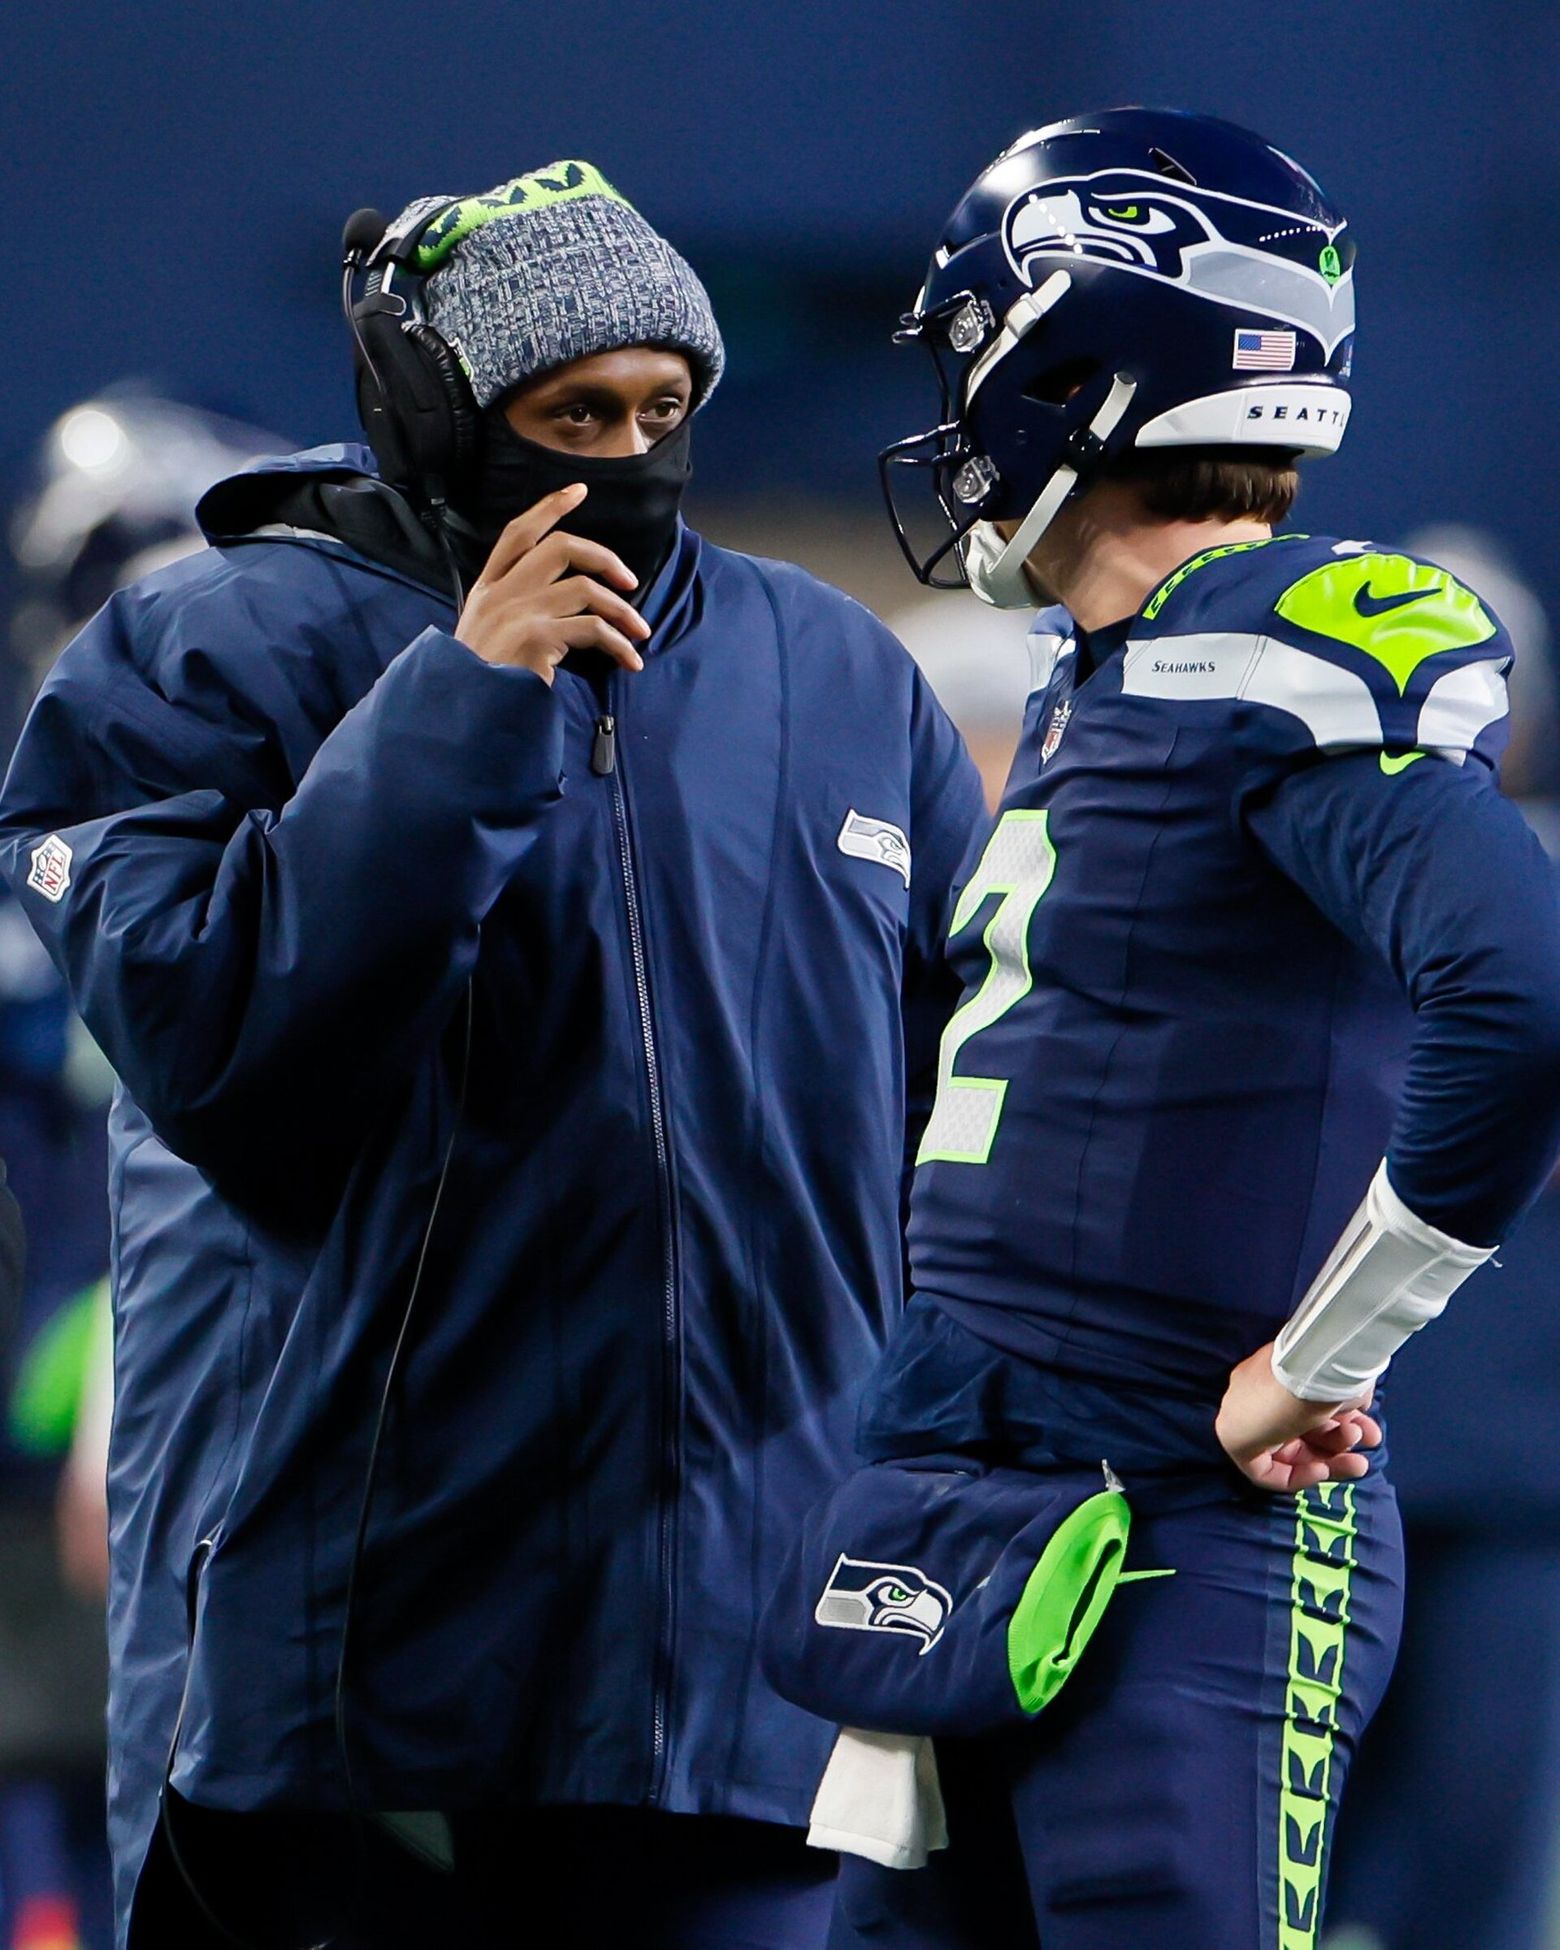 Geno Smith, Seahawks improve playoff chances in rallying to beat the Titans